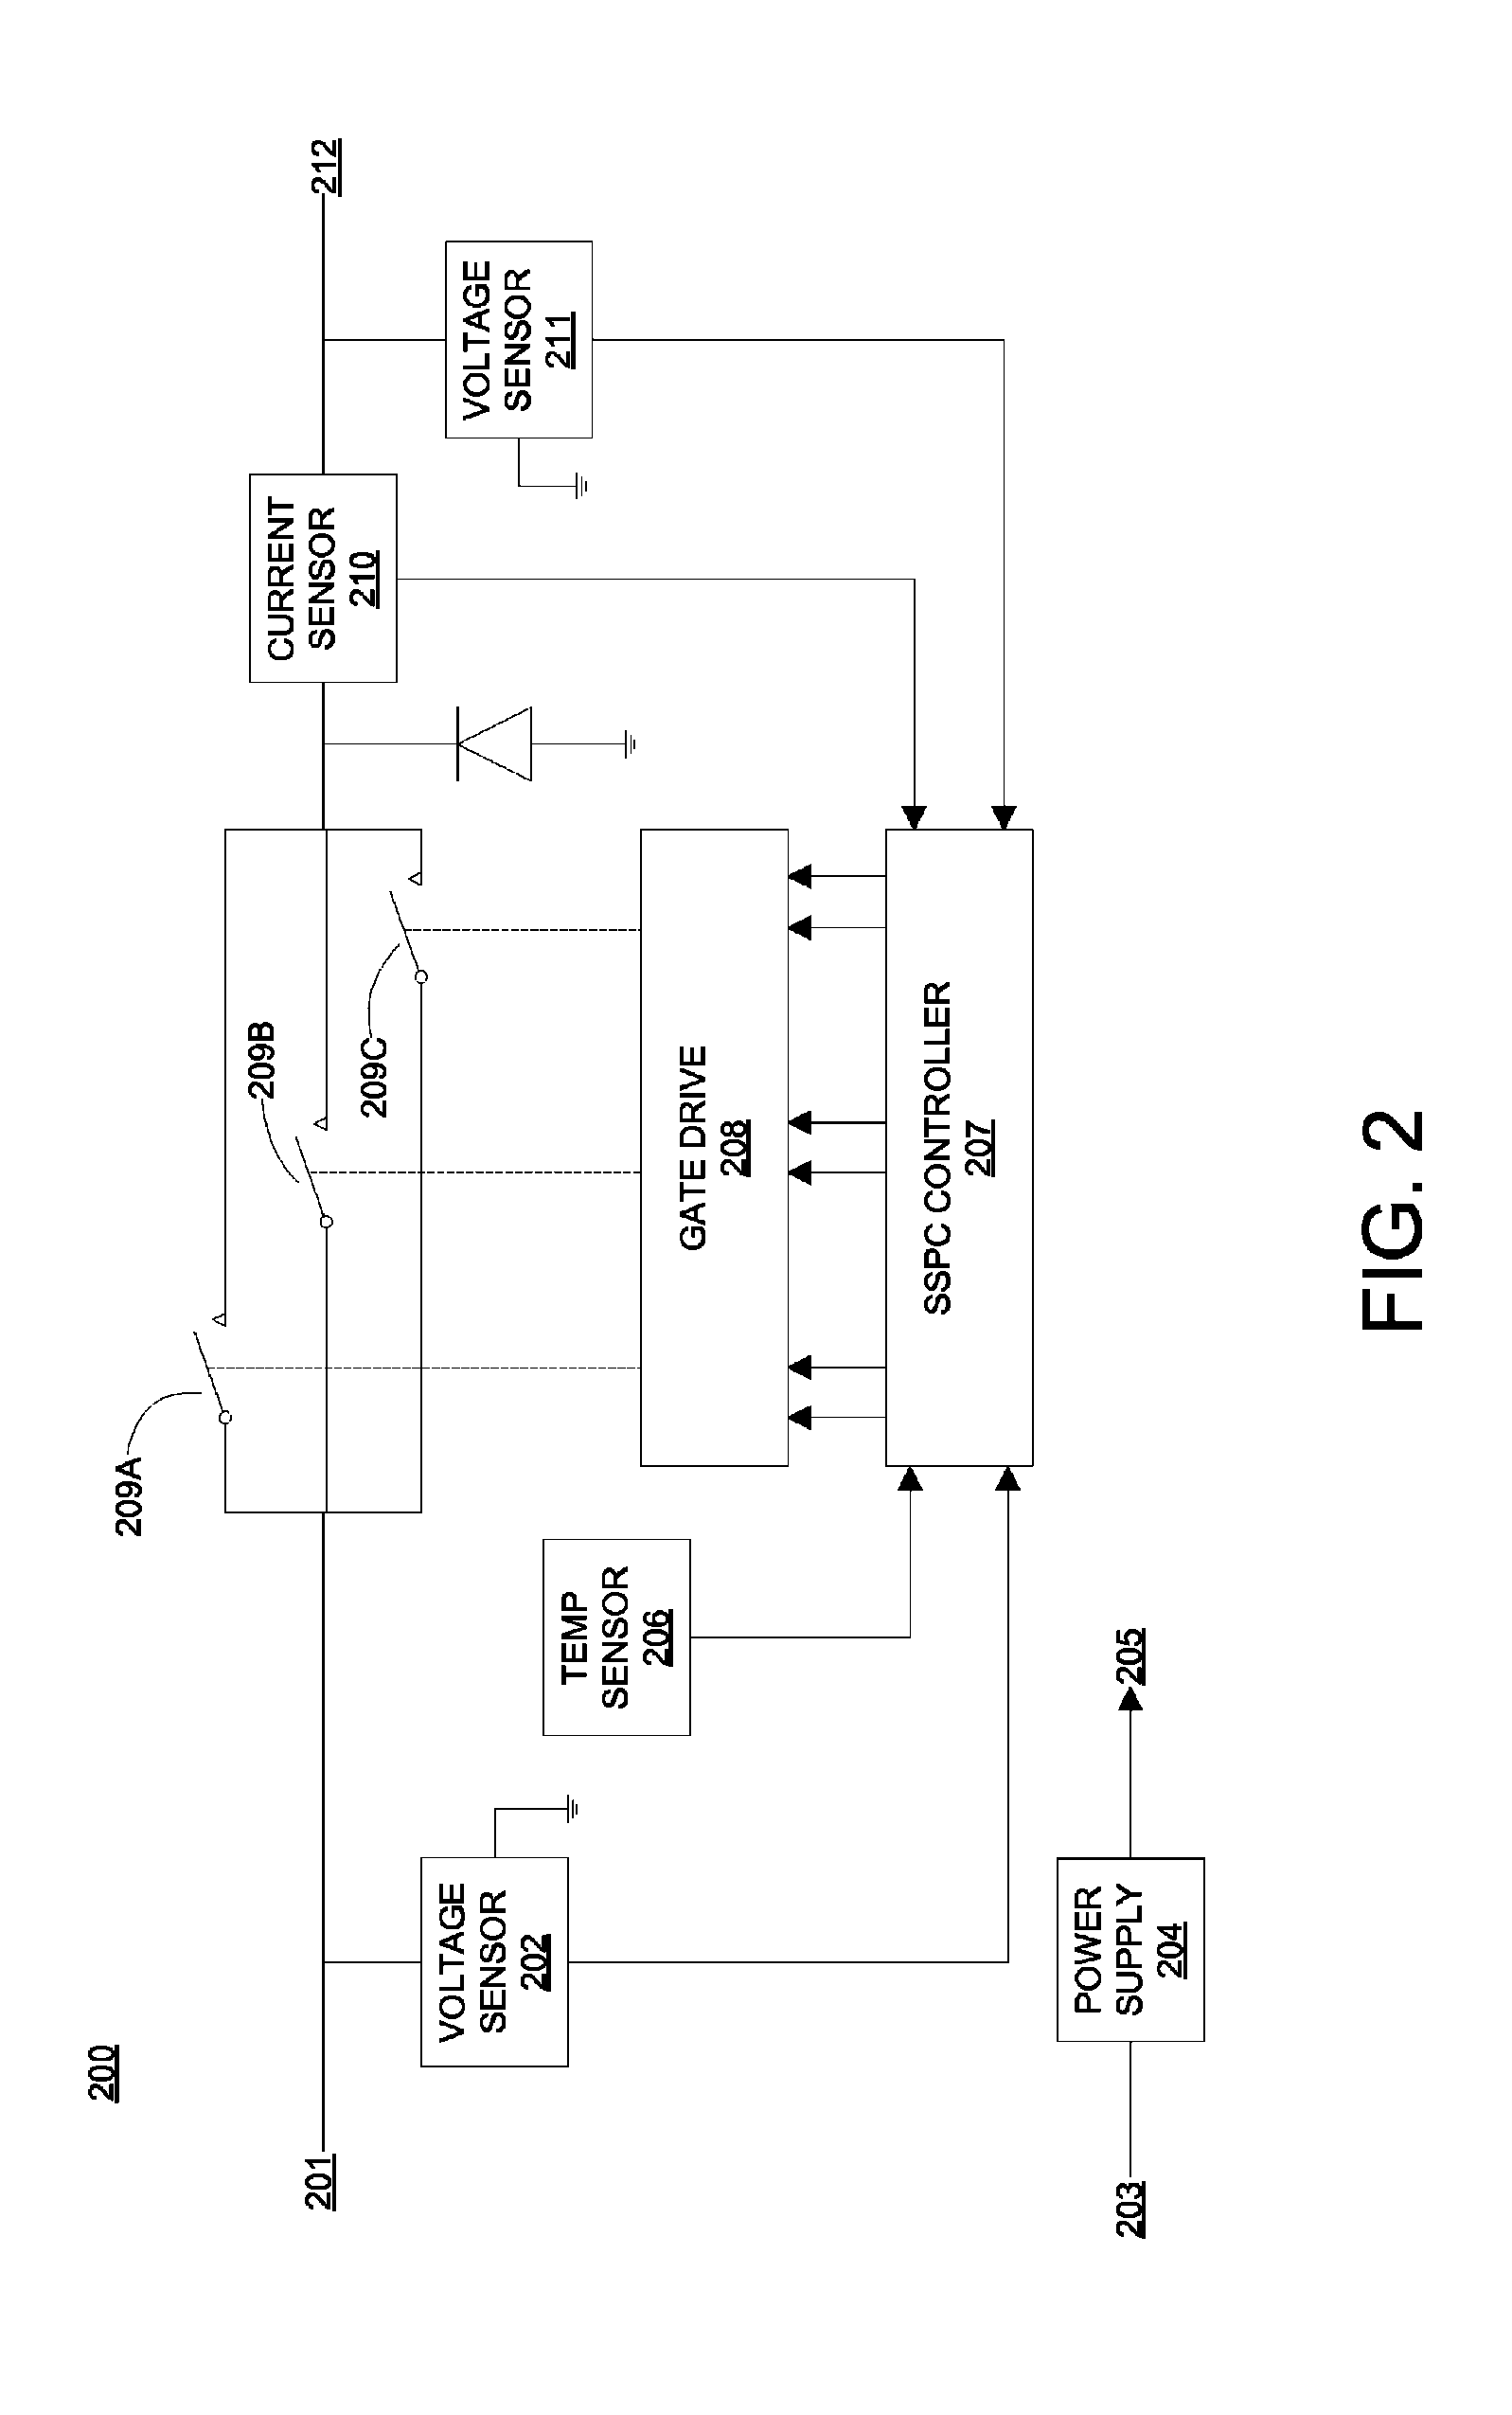 SSPC for soft start of DC link capacitor